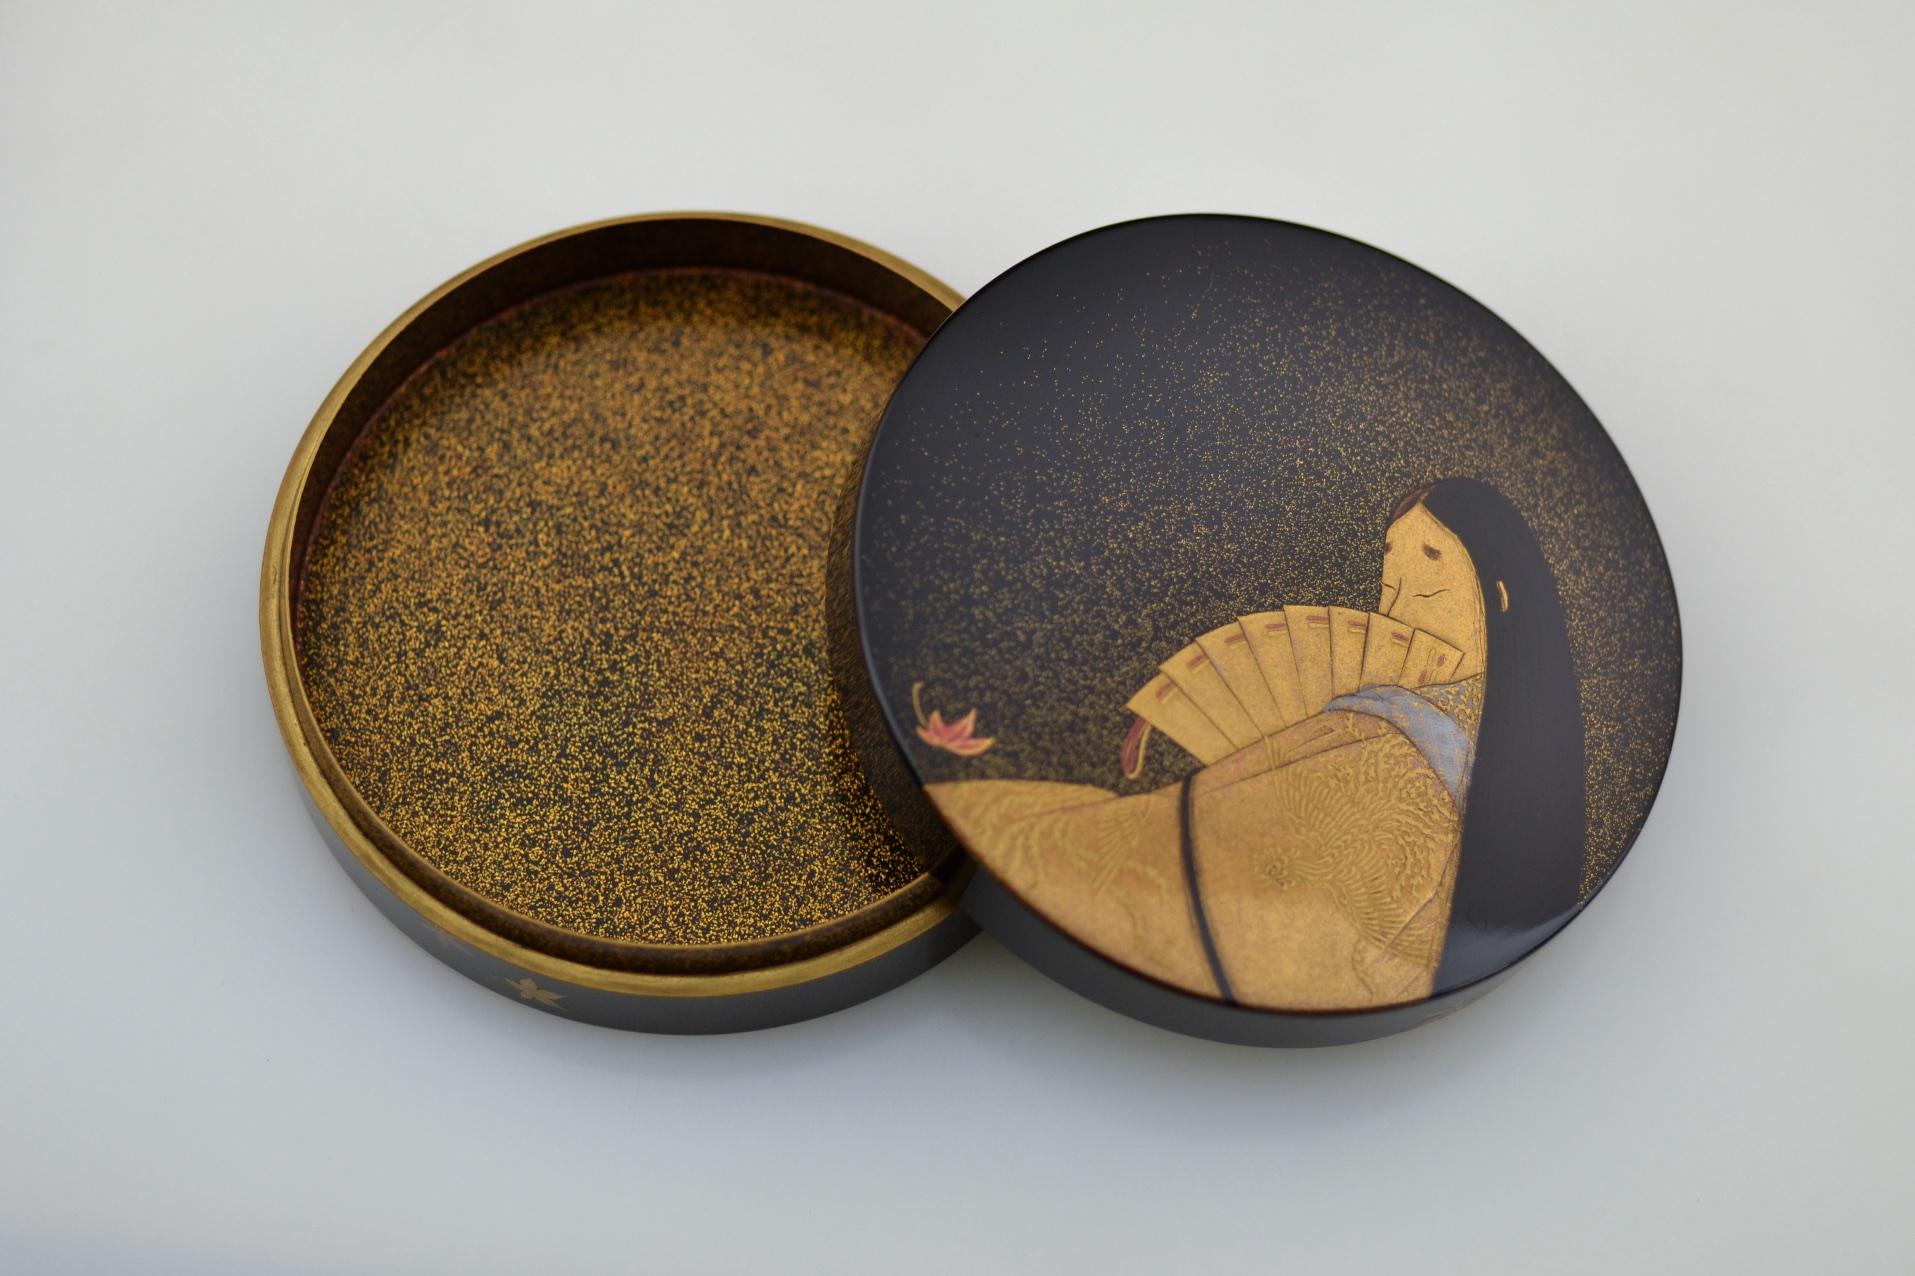 This luxurious maki-e incense box was made by the great pre-war Taishō/Shōwa-period lacquer master Imaizumi Seishi. Against a black-lacquered and gold-spinkled polished togidashi background, the exterior of the box is finished with a delicate